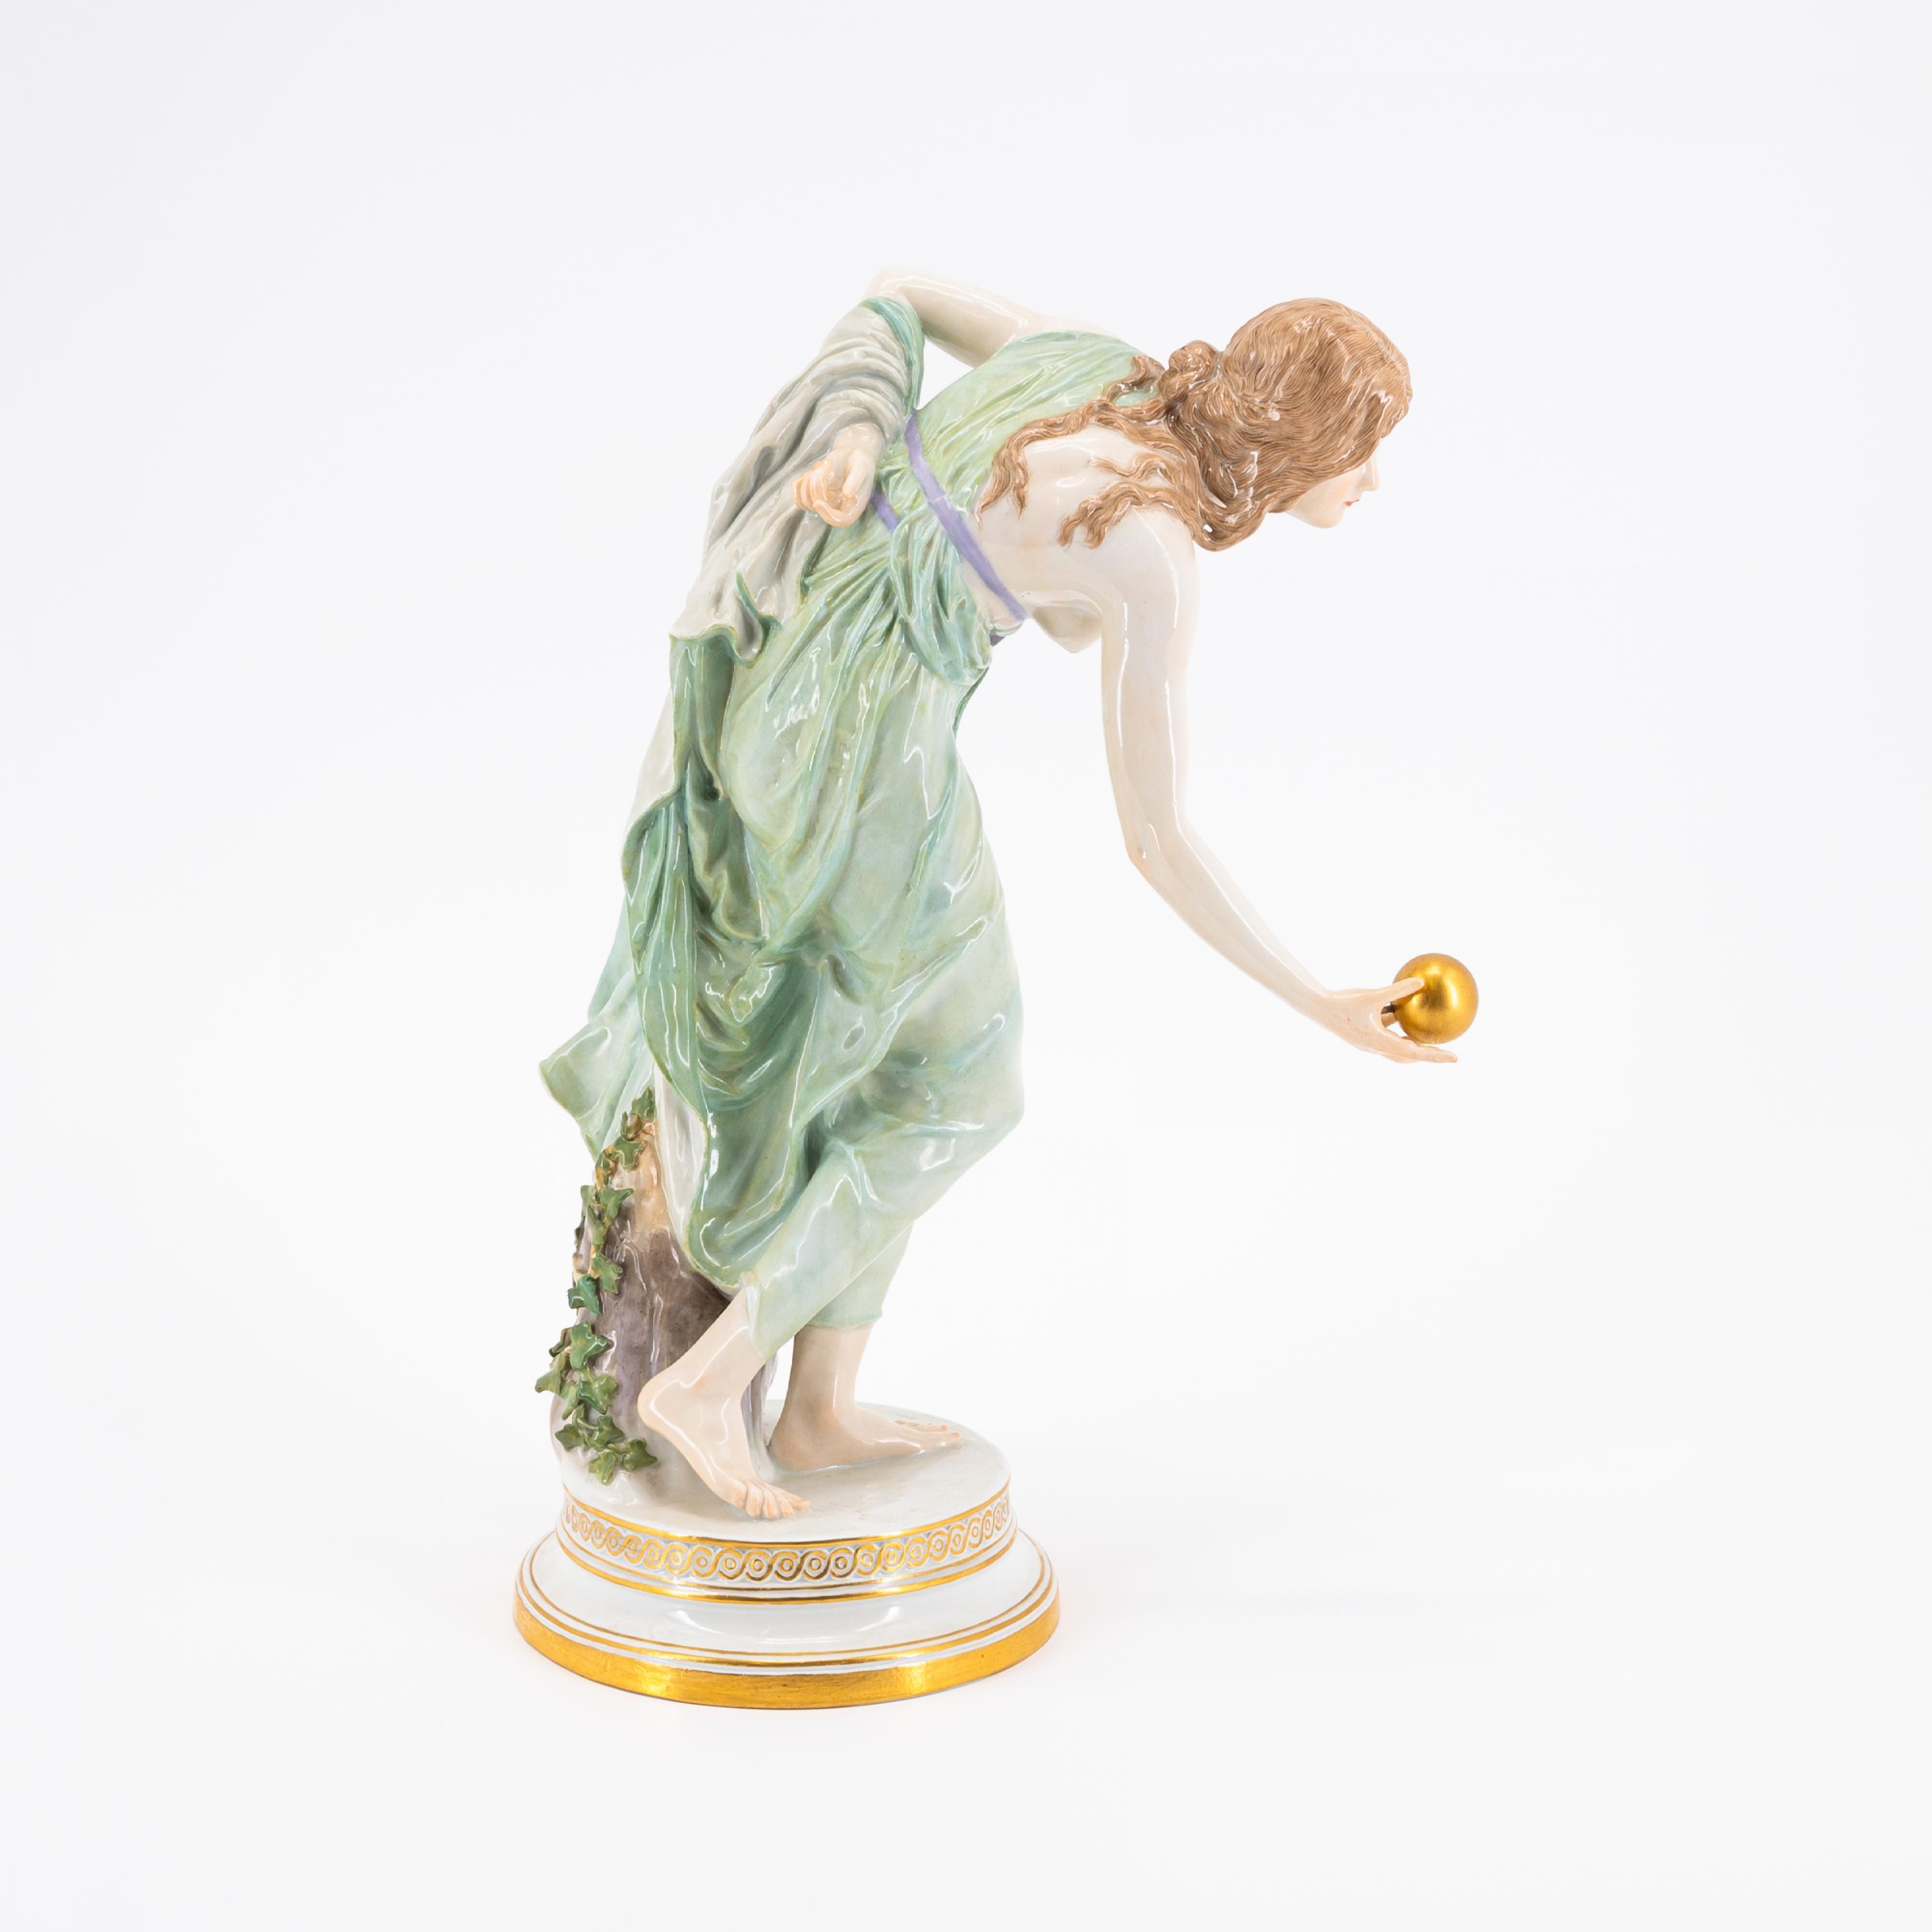 PORCELAIN FIGURE OF THE BALL PLAYER - Image 4 of 5